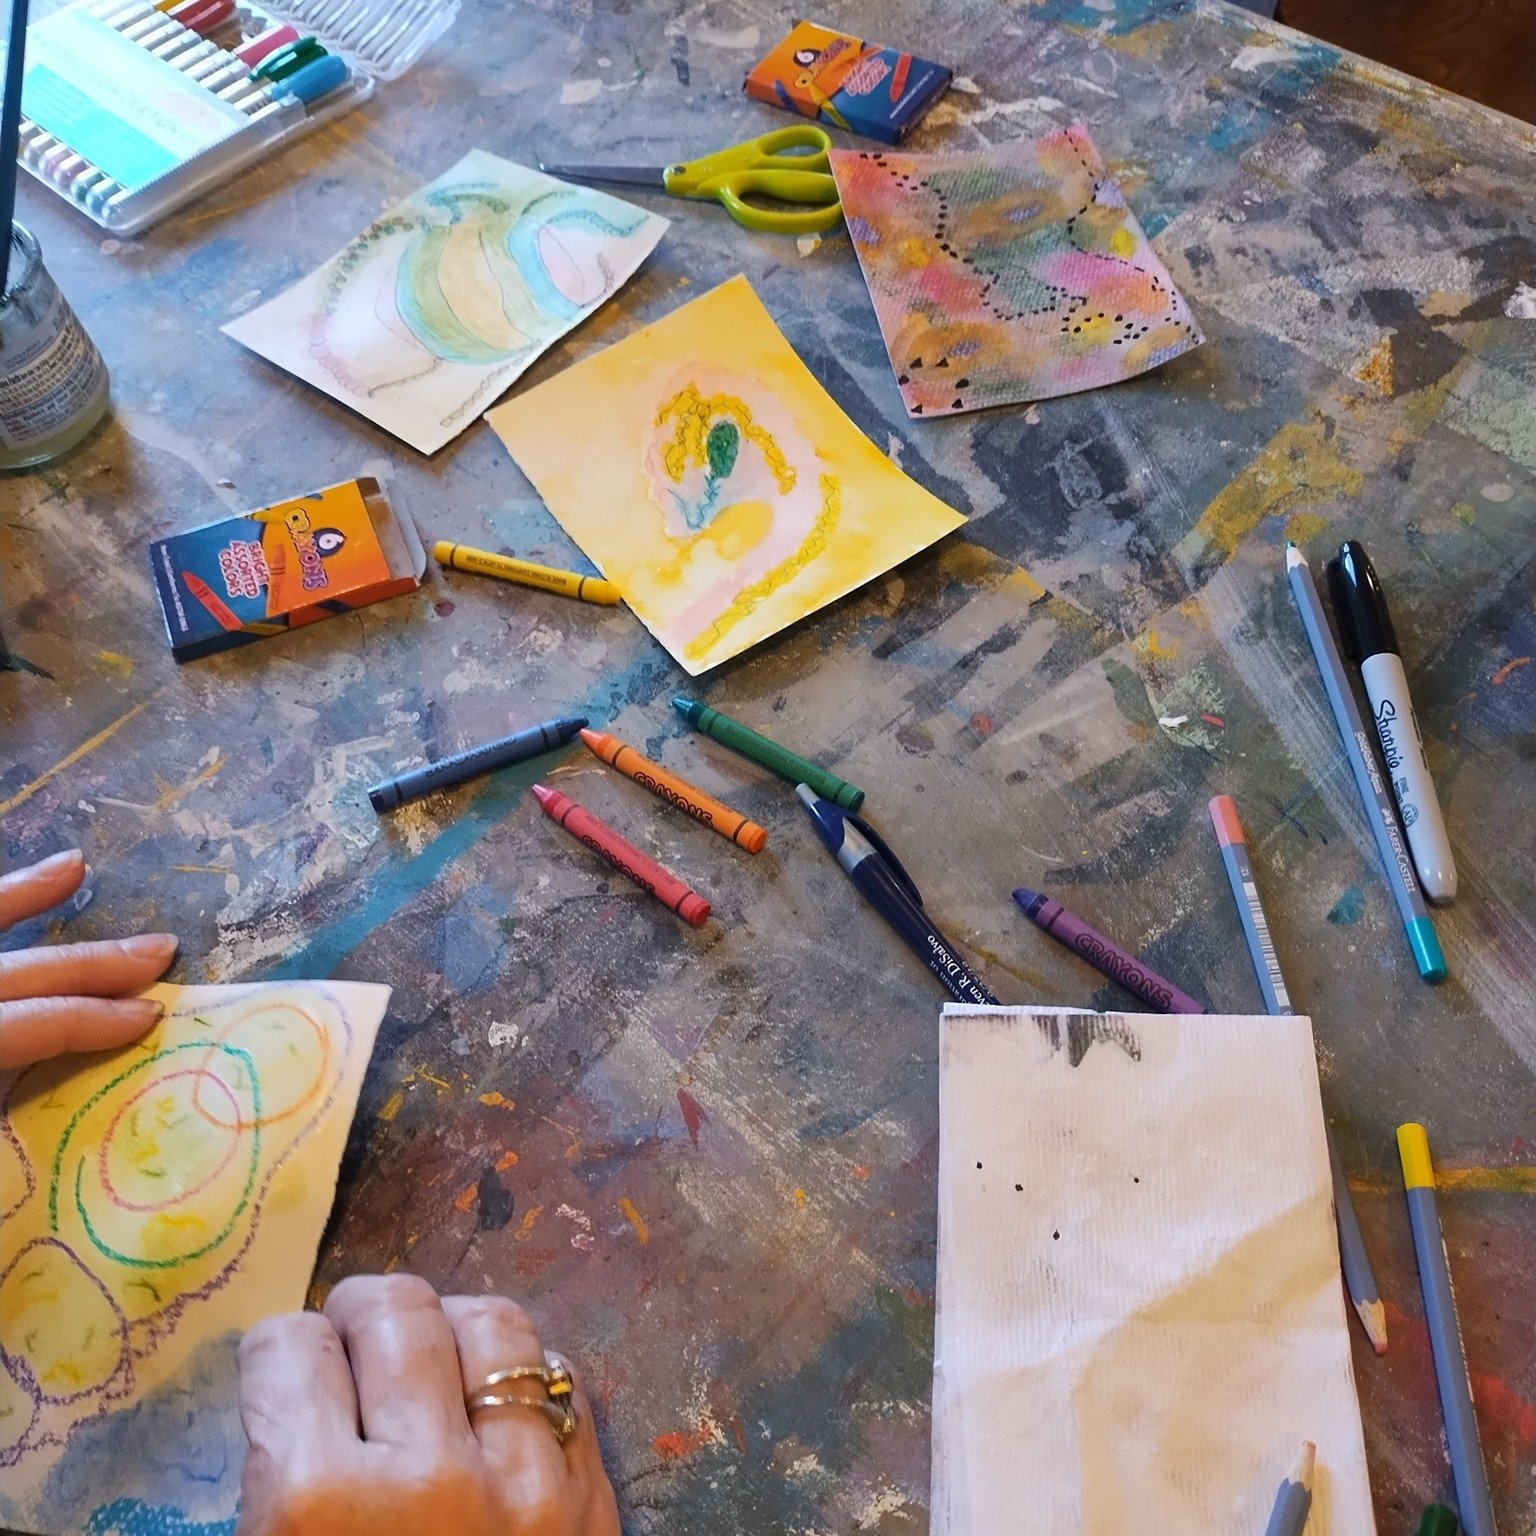 Another creative and fun class with instructor Jude leading the Creative Art Series for Seniors.

We doodled in black ink then filled in areas with water color pencils. We pulled out watercolor palettes, crayons and pastels, and the group creatively 